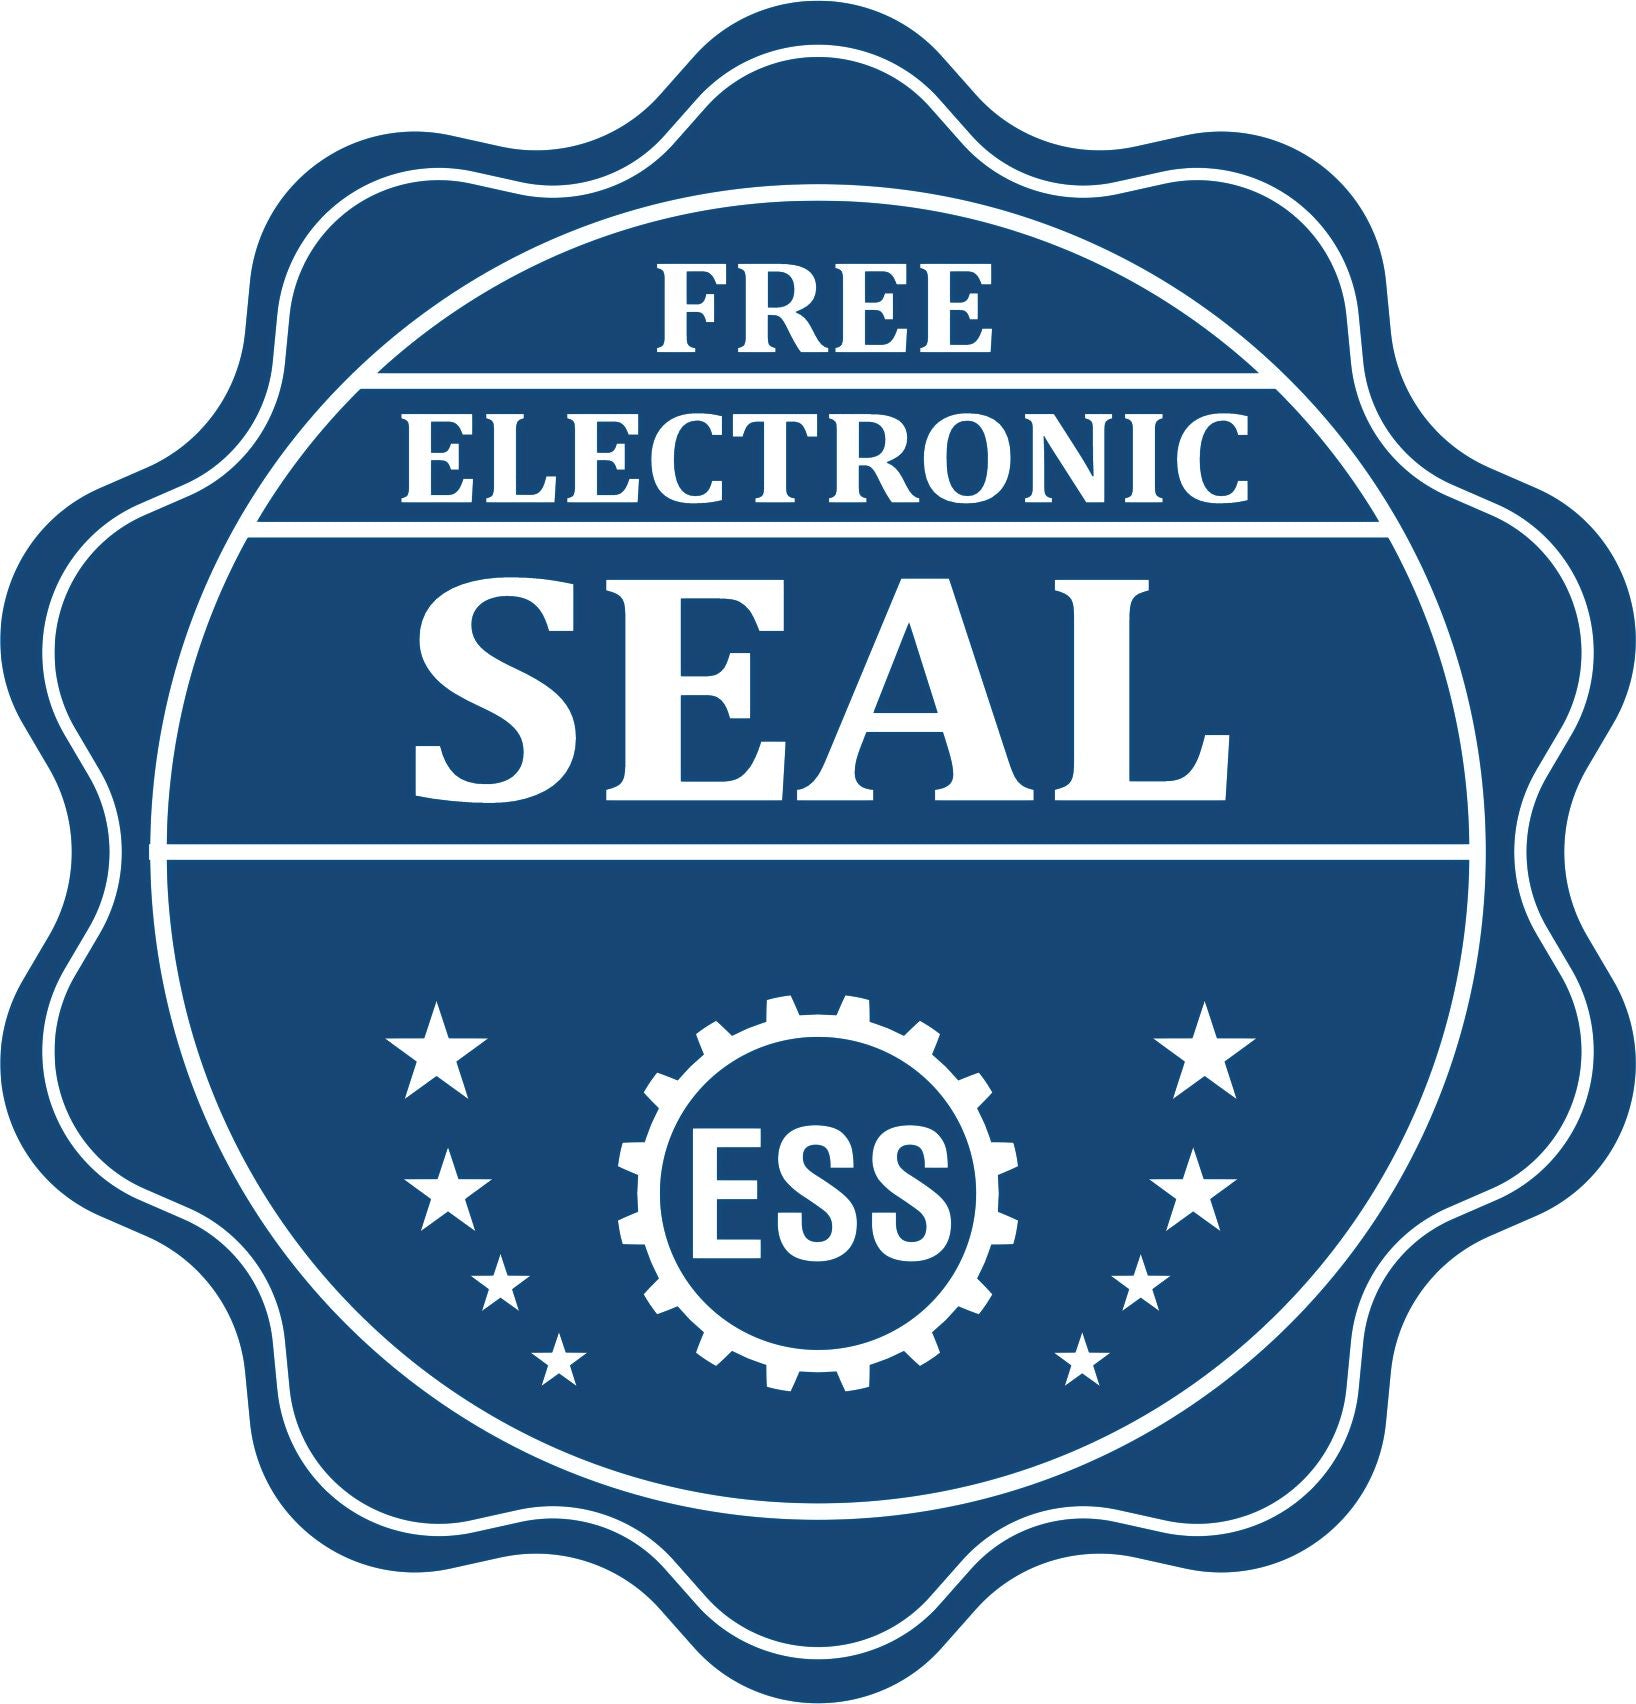 A badge showing a free electronic seal for the Heavy Duty Cast Iron Alaska Engineer Seal Embosser with stars and the ESS gear on the emblem.